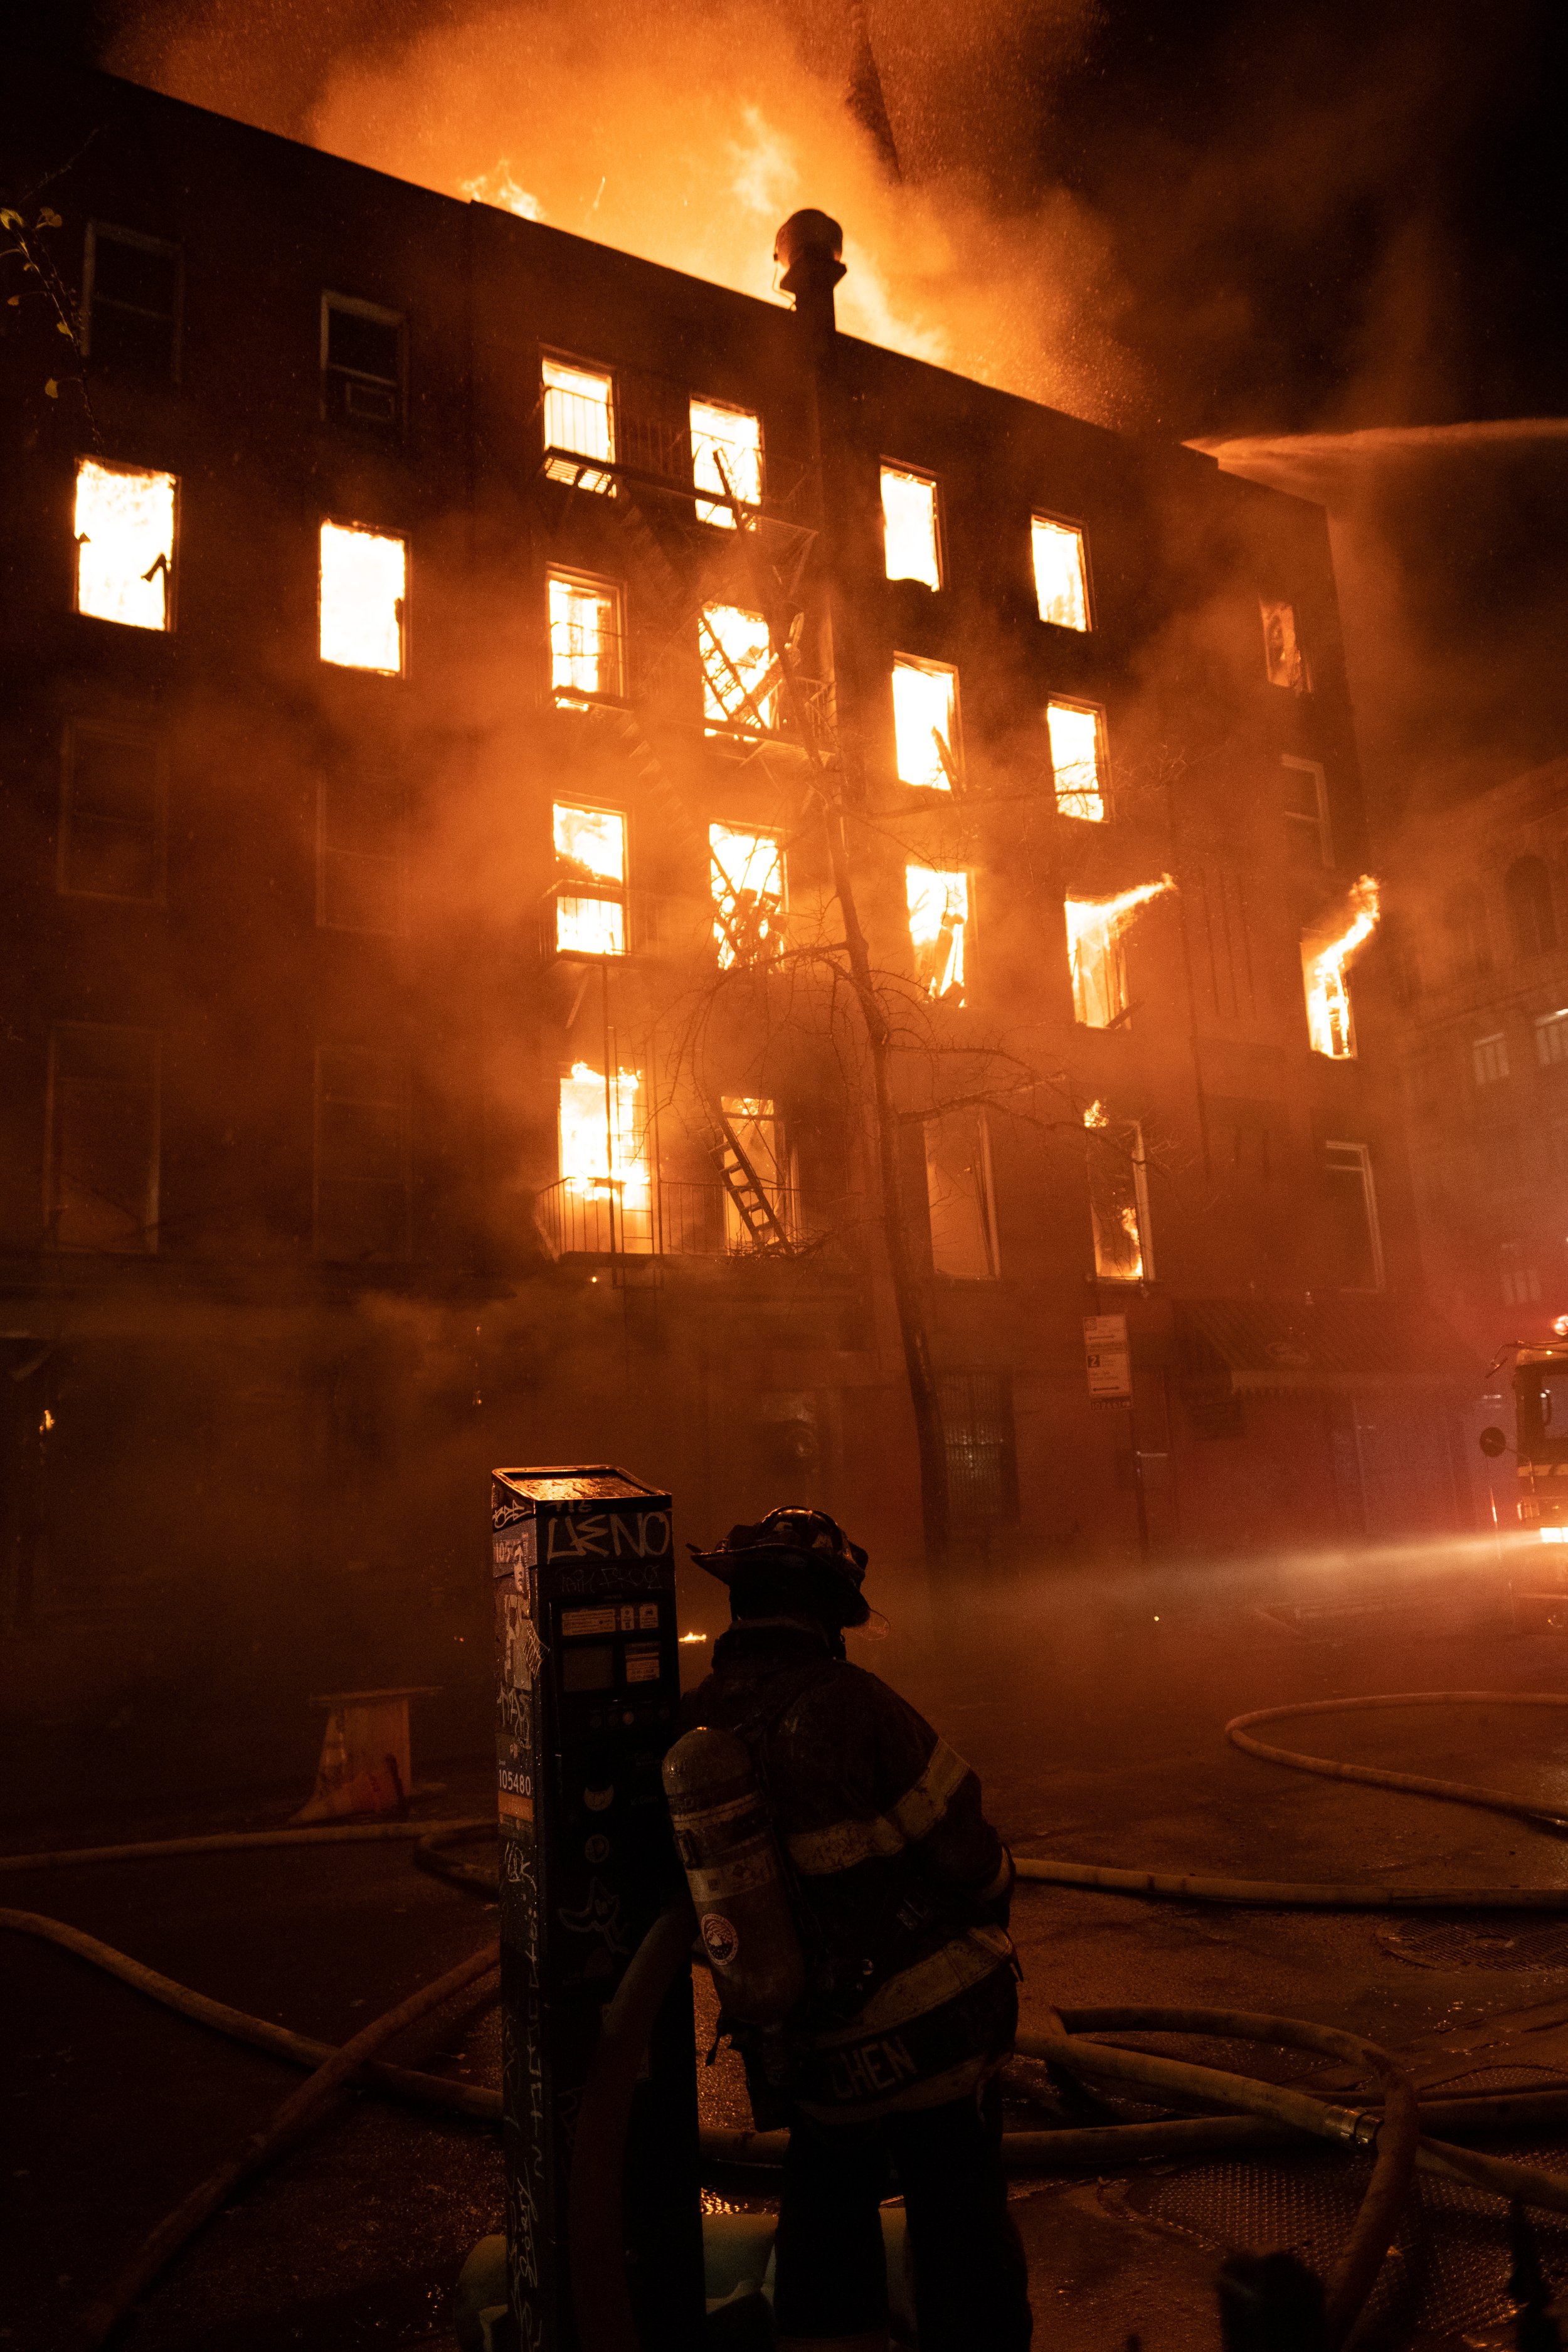  December 6th, 2020 - Manhattan, NY: Firefighters responded to 48 E. 7th St. for a call of a fire in the building that quickly spread to the neighboring Middle Collegiate Church, home to New York’s Liberty Bell, and destroyed the 128-year-old structu